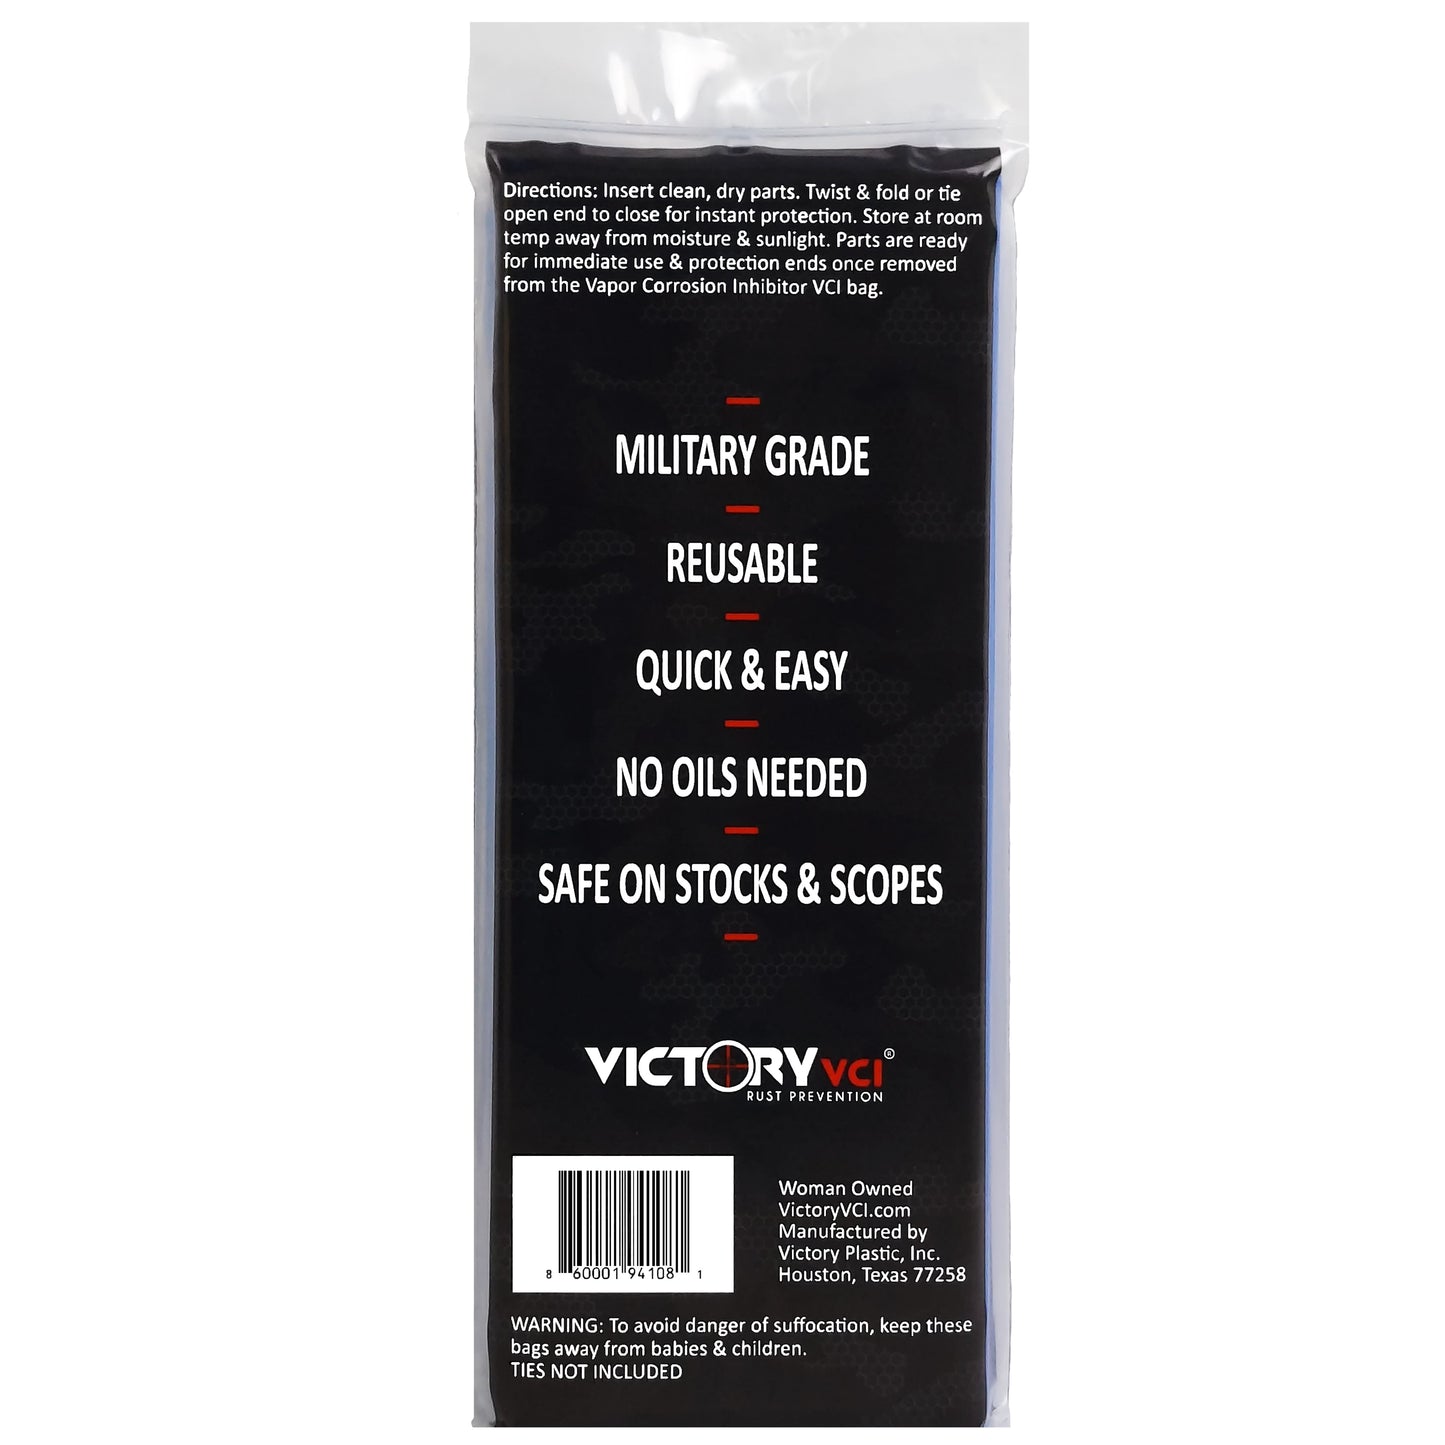 Prevent rust on guns & ammo with Victory VCI Bags.